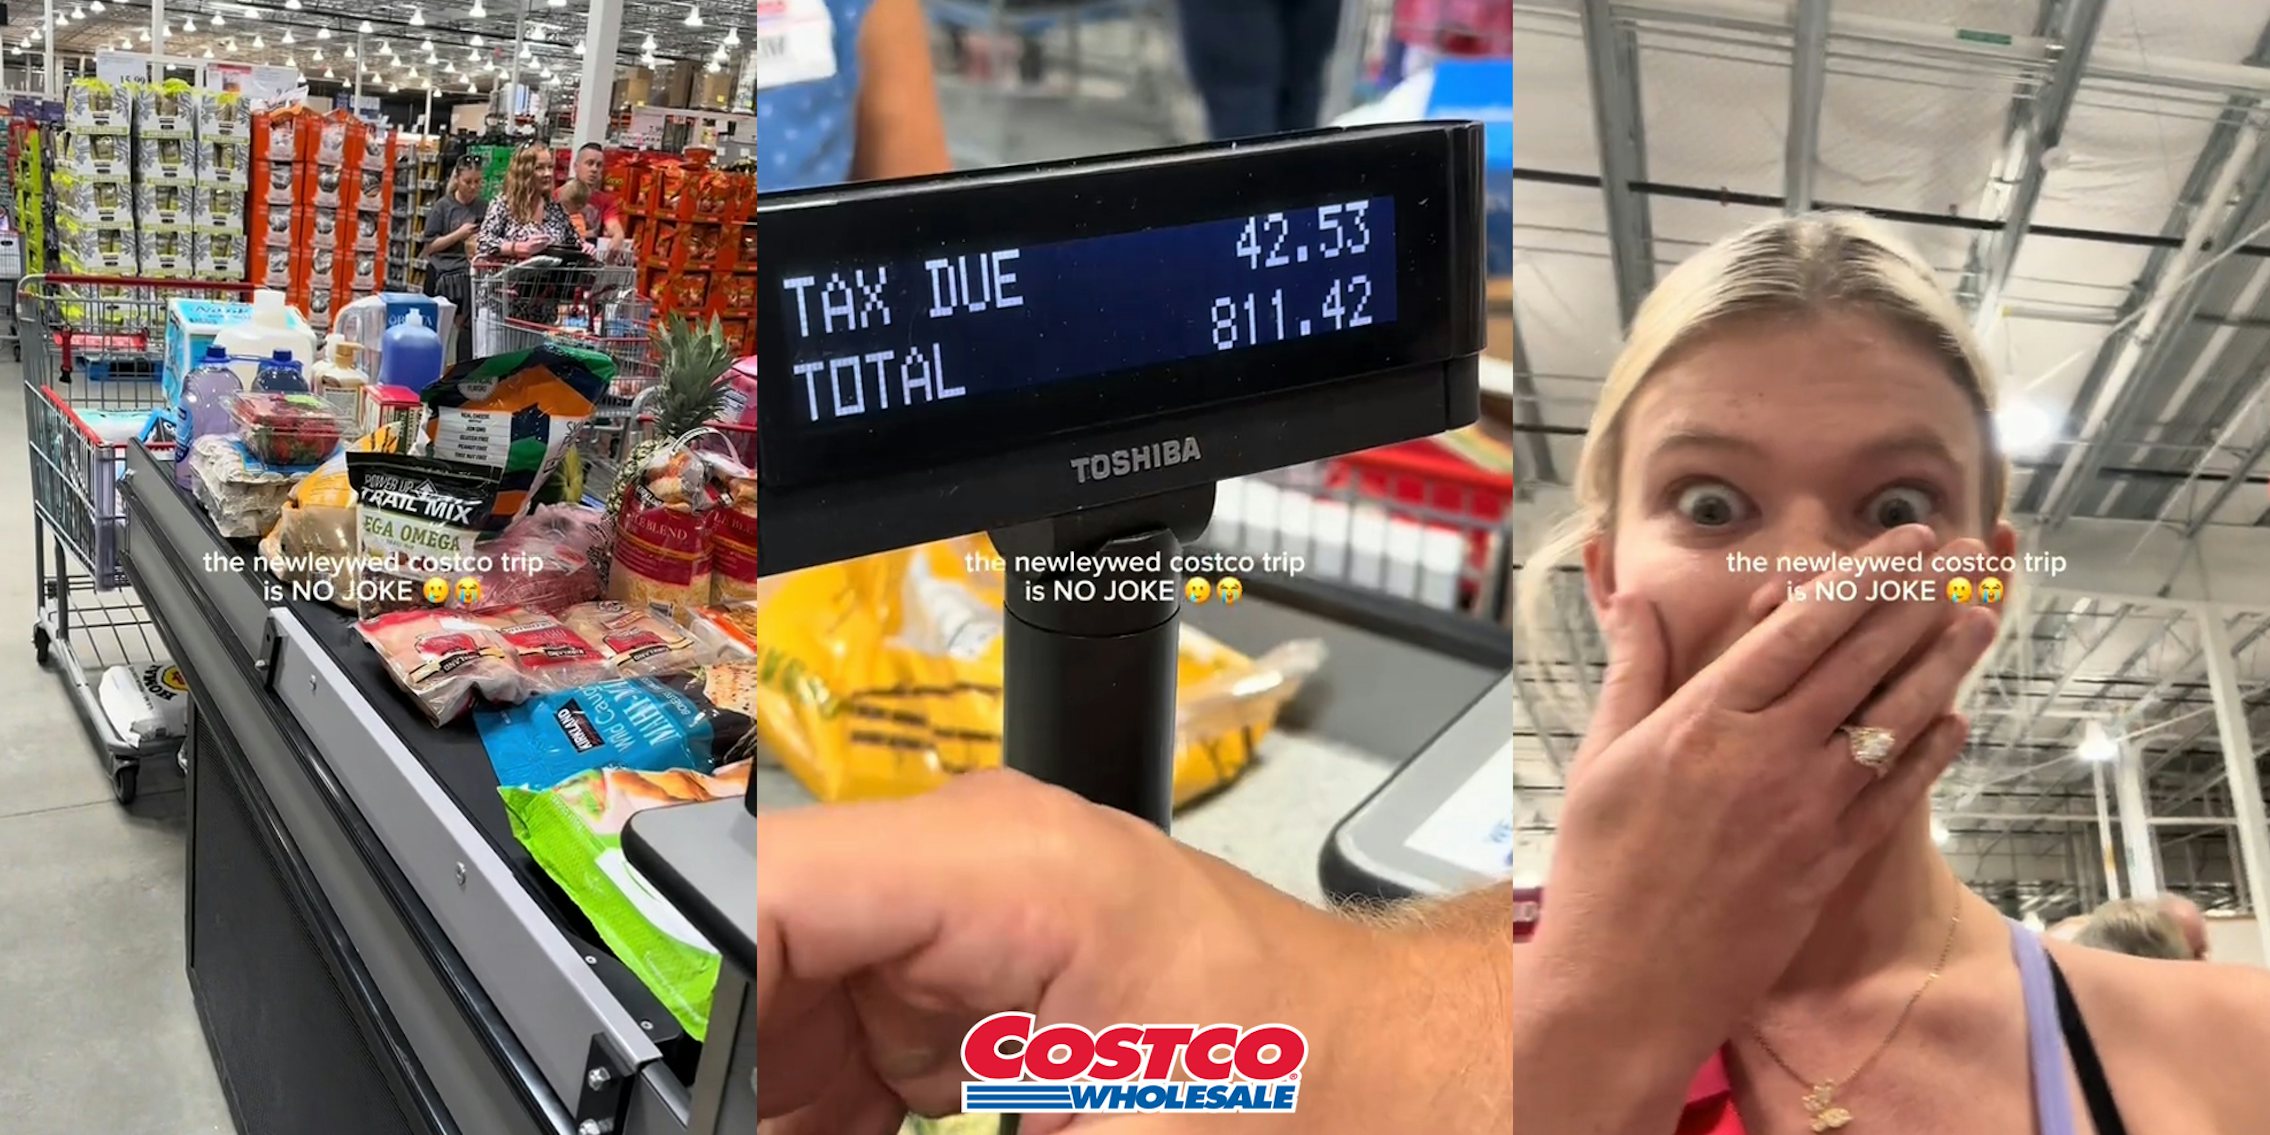 Costco checkout conveyer belt full of groceries with caption 'the newlywed costco trip is NO JOKE' (l) Costco checkout displaying 'TOTAL $811.42' with Costco logo at bottom (c) Costco customer with hand over mouth with caption 'the newlywed costco trip is NO JOKE' (r)